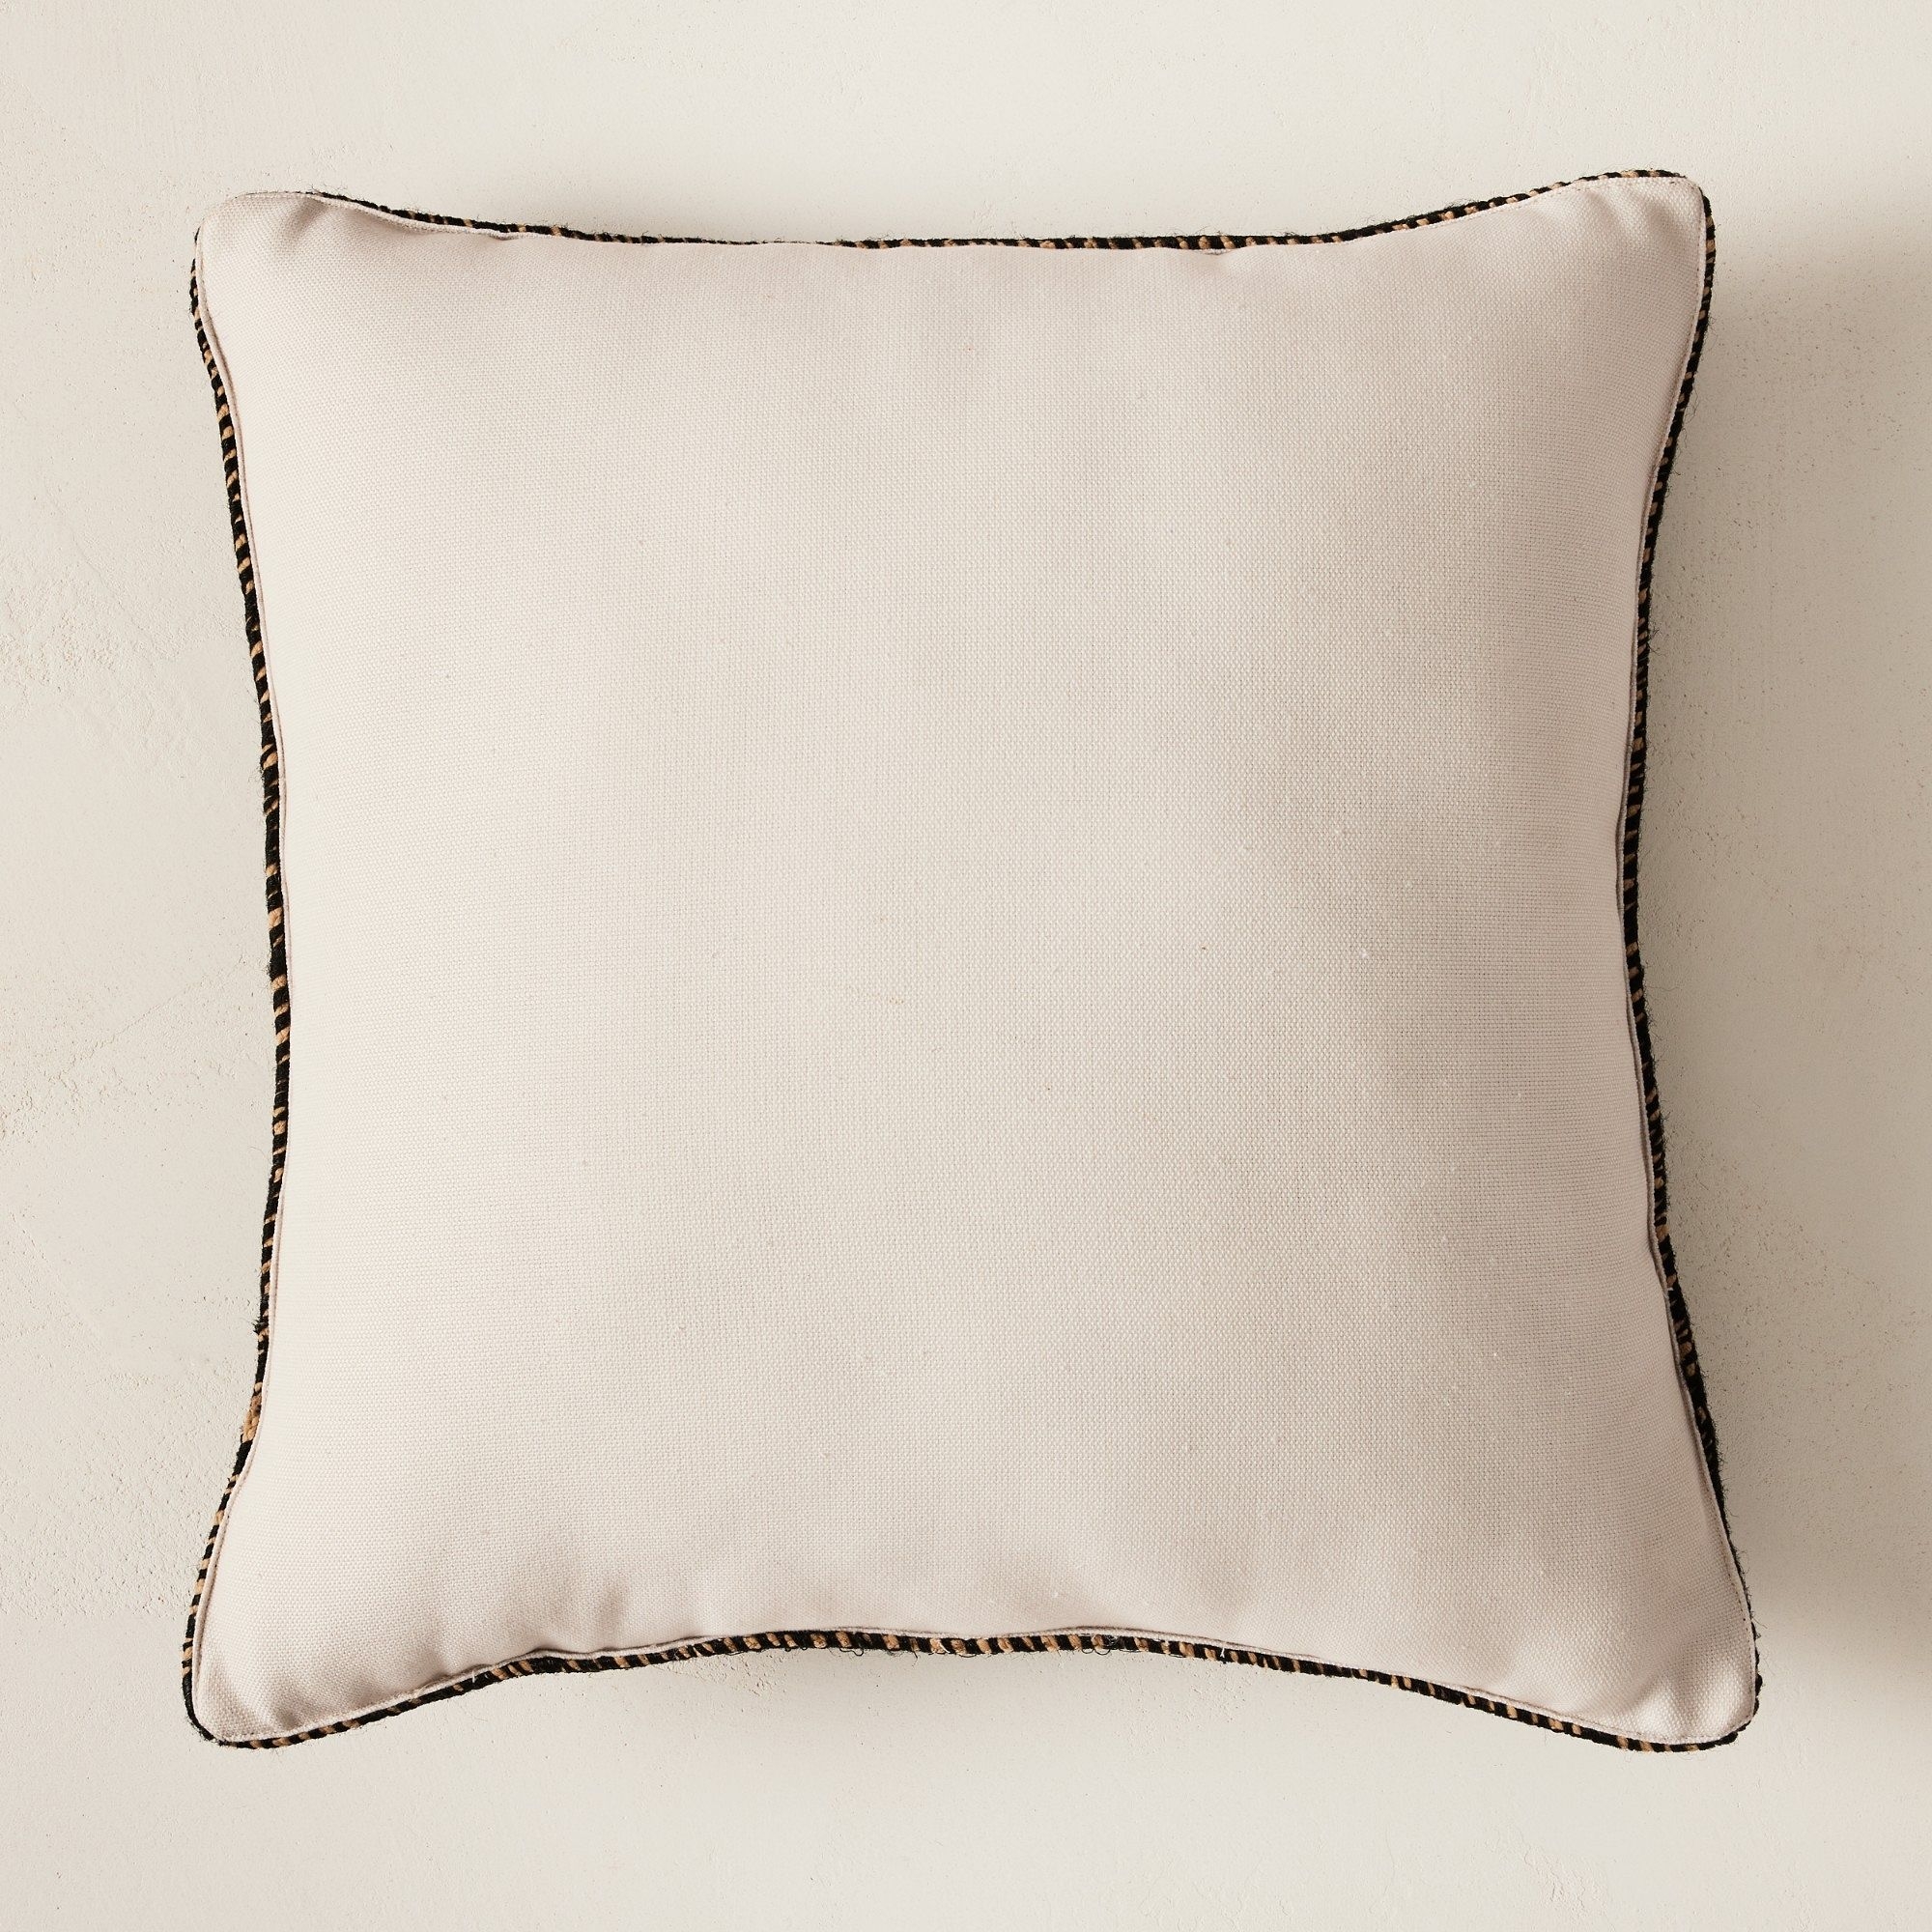 Outdoor Woven Arches Pillow, 20"x20", Black - Image 1